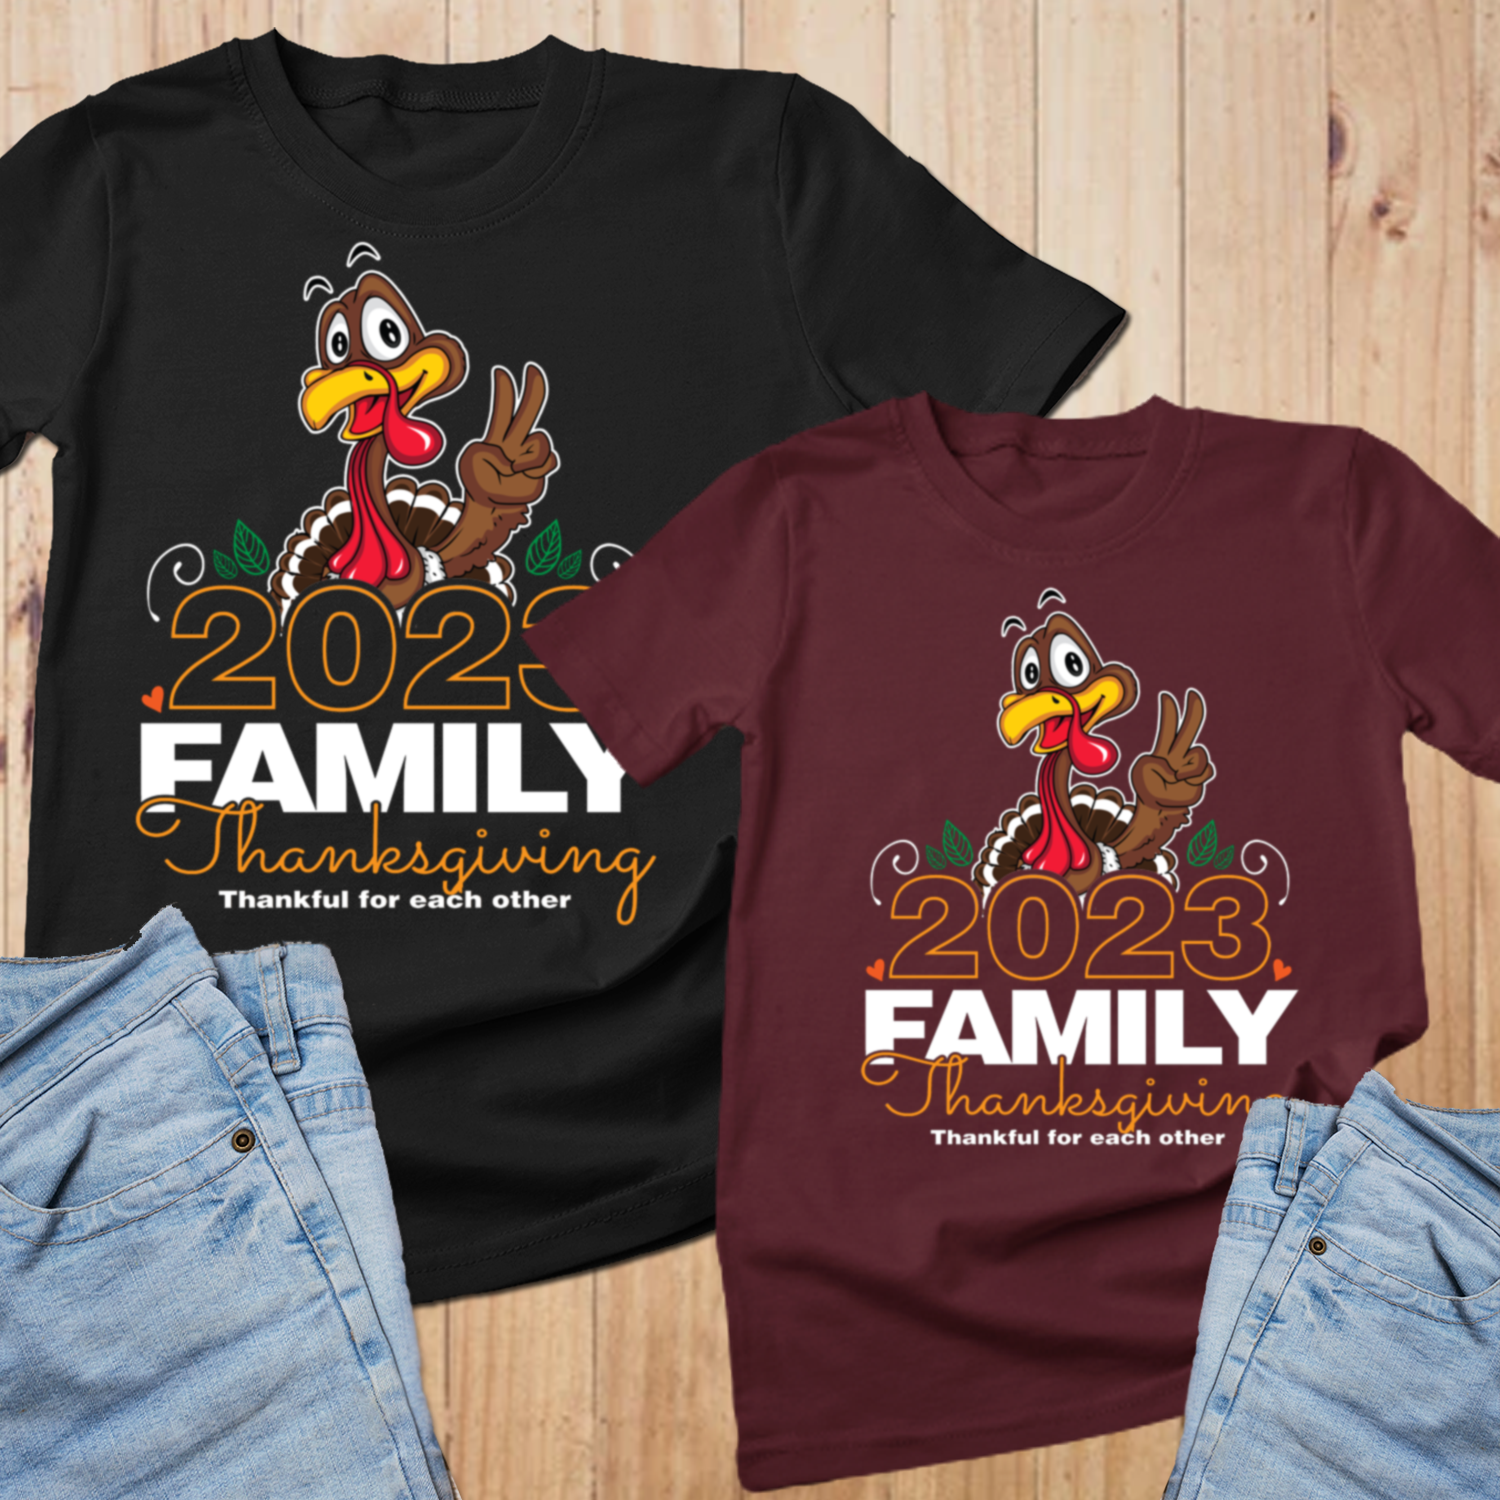 Thankful for each other 2023 turkey thanksgiving shirts family, family shirts for thanksgiving, Thankful Shirt, thanksgiving shirts for the family - Wilson Design Group